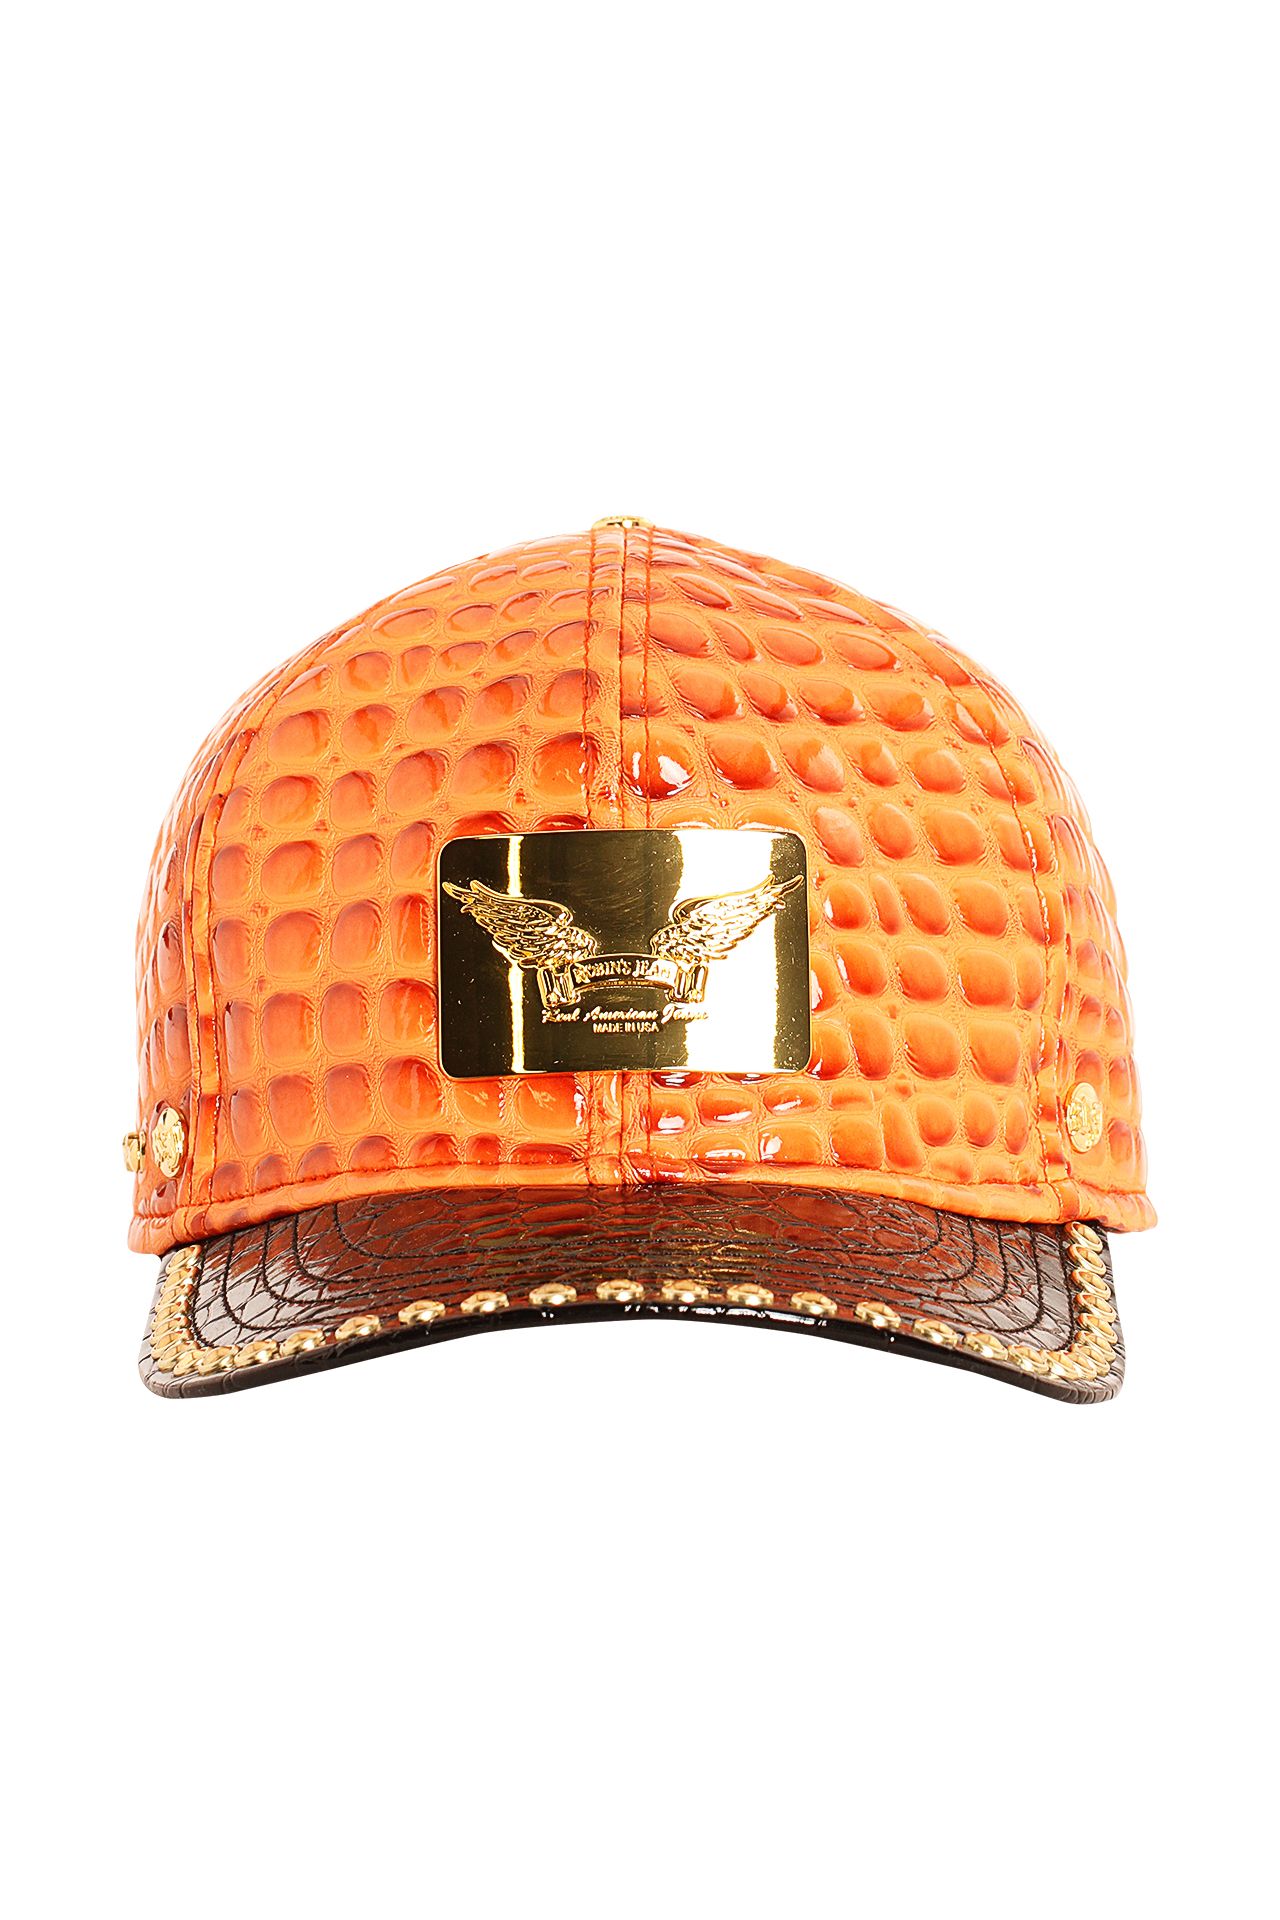 ROBIN'S GOLD TAG CAP IN ORANGE AND BLACK LIZARD WITH GOLD NAILHEADS